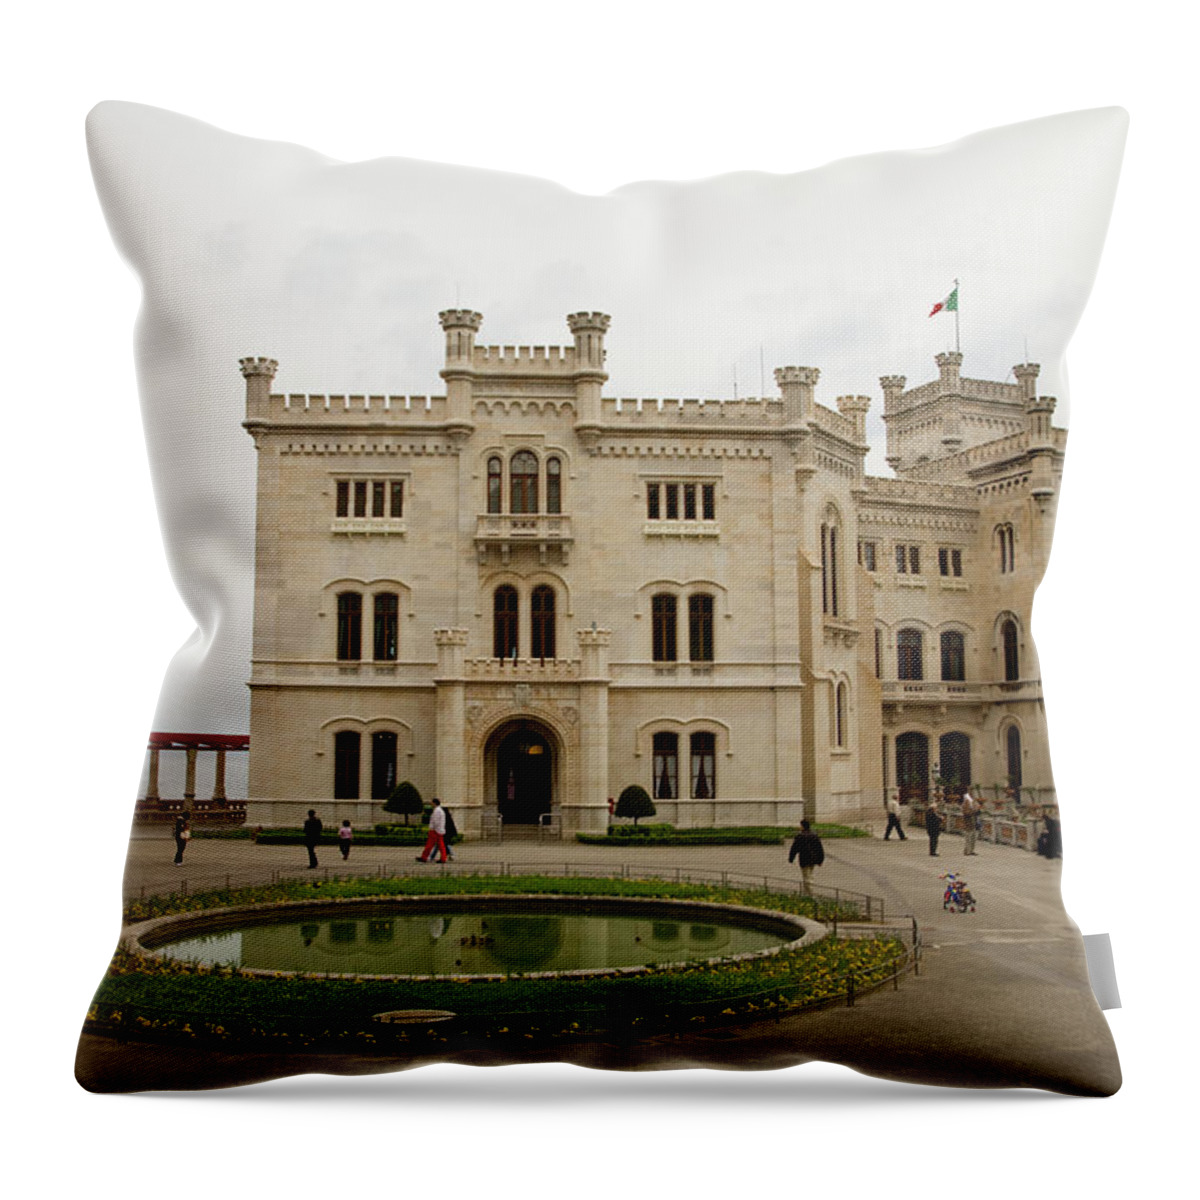 Miramare Throw Pillow featuring the photograph Miramare, Trieste, Italy #6 by Ian Middleton